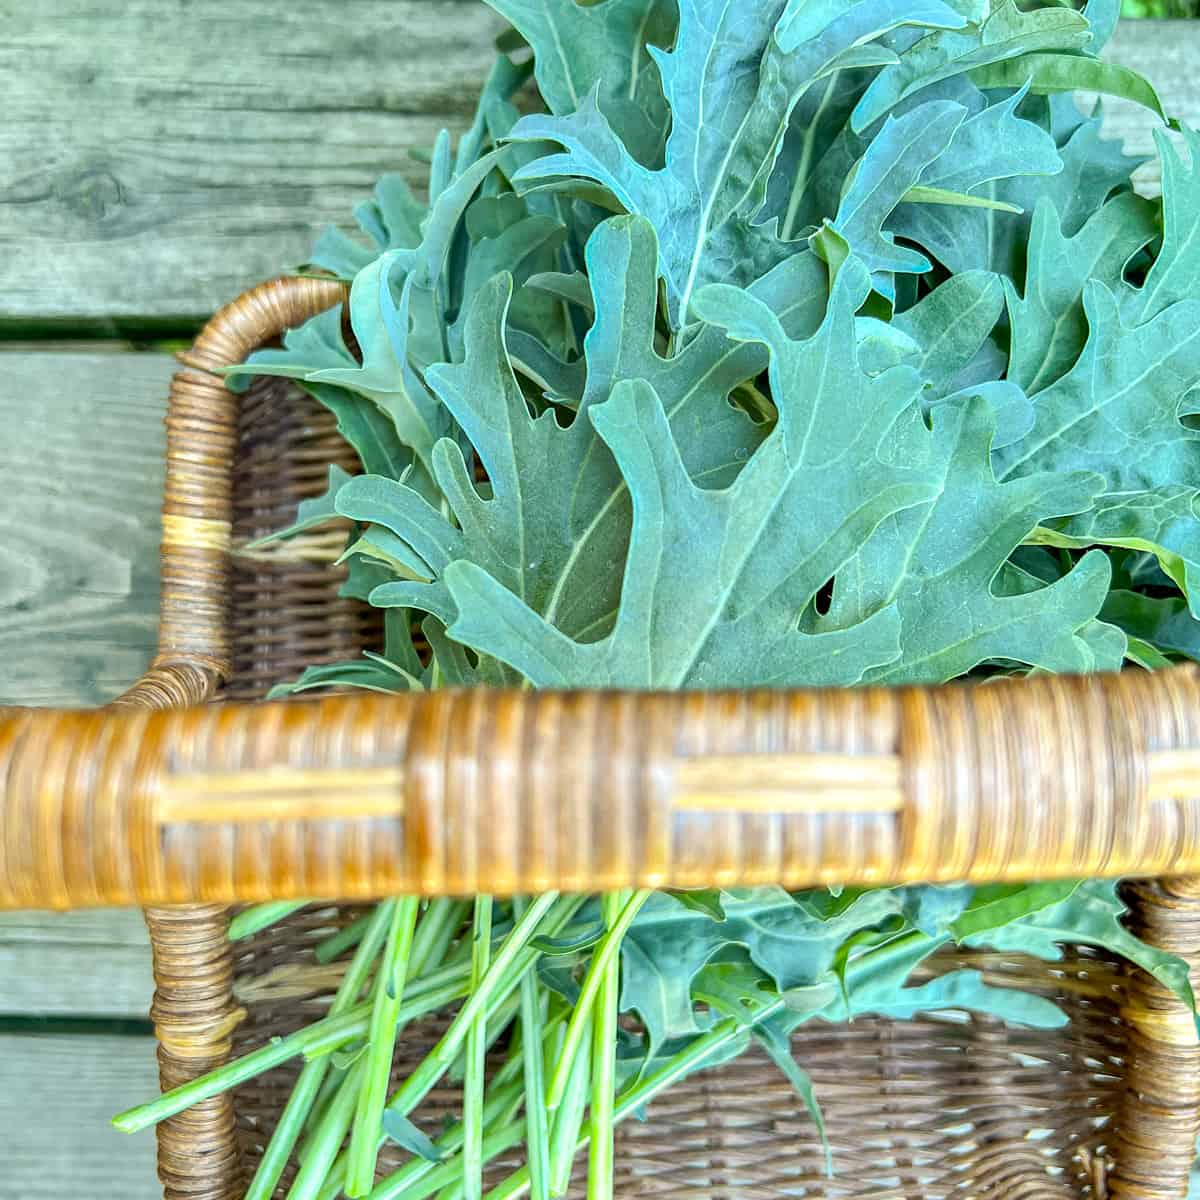 A basket full of freshly picked italian greens called spigariello.